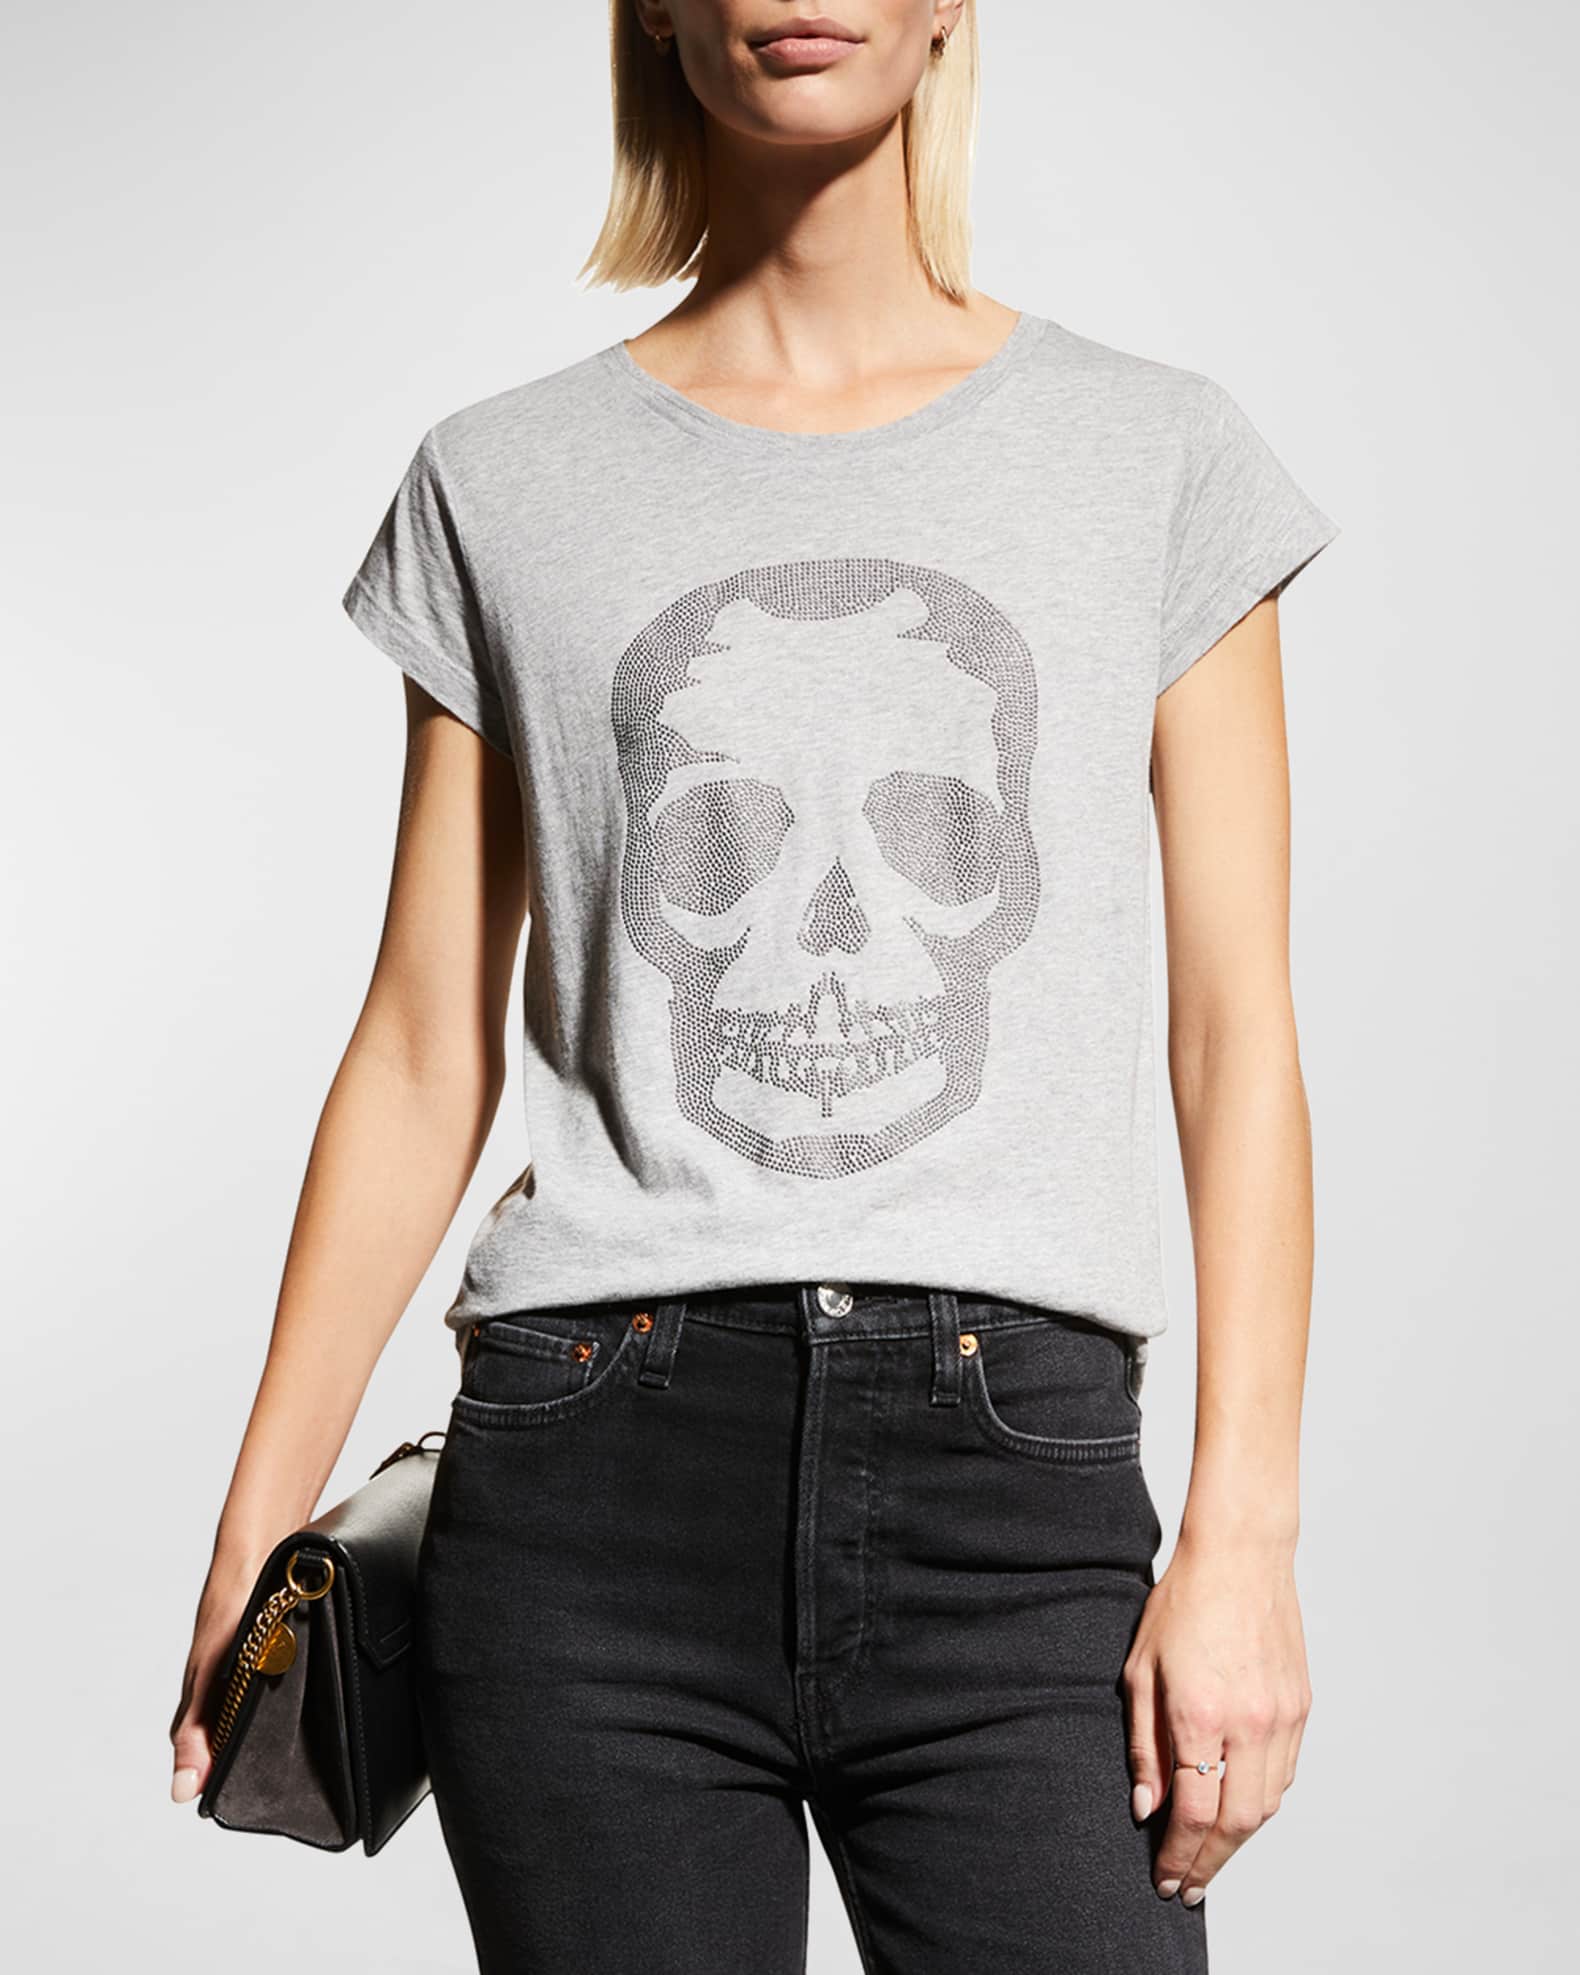 Authentic lV Towel Embroidered Skull T-Shirt